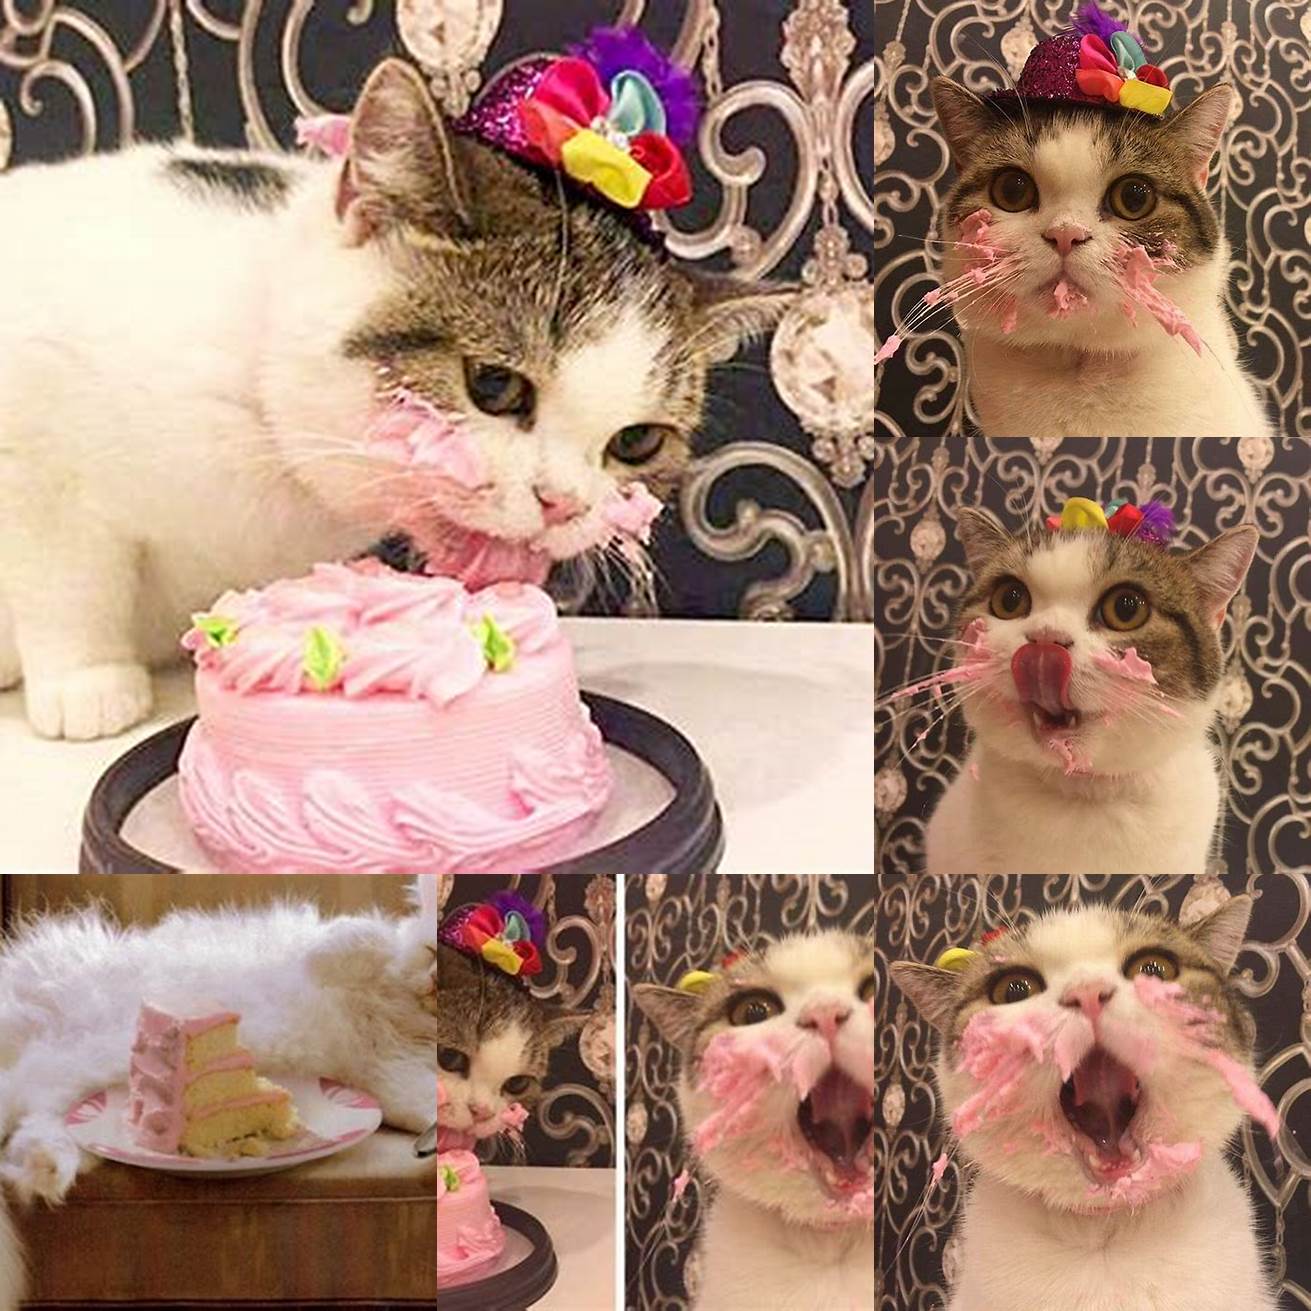 Image of a happy cat eating the cake